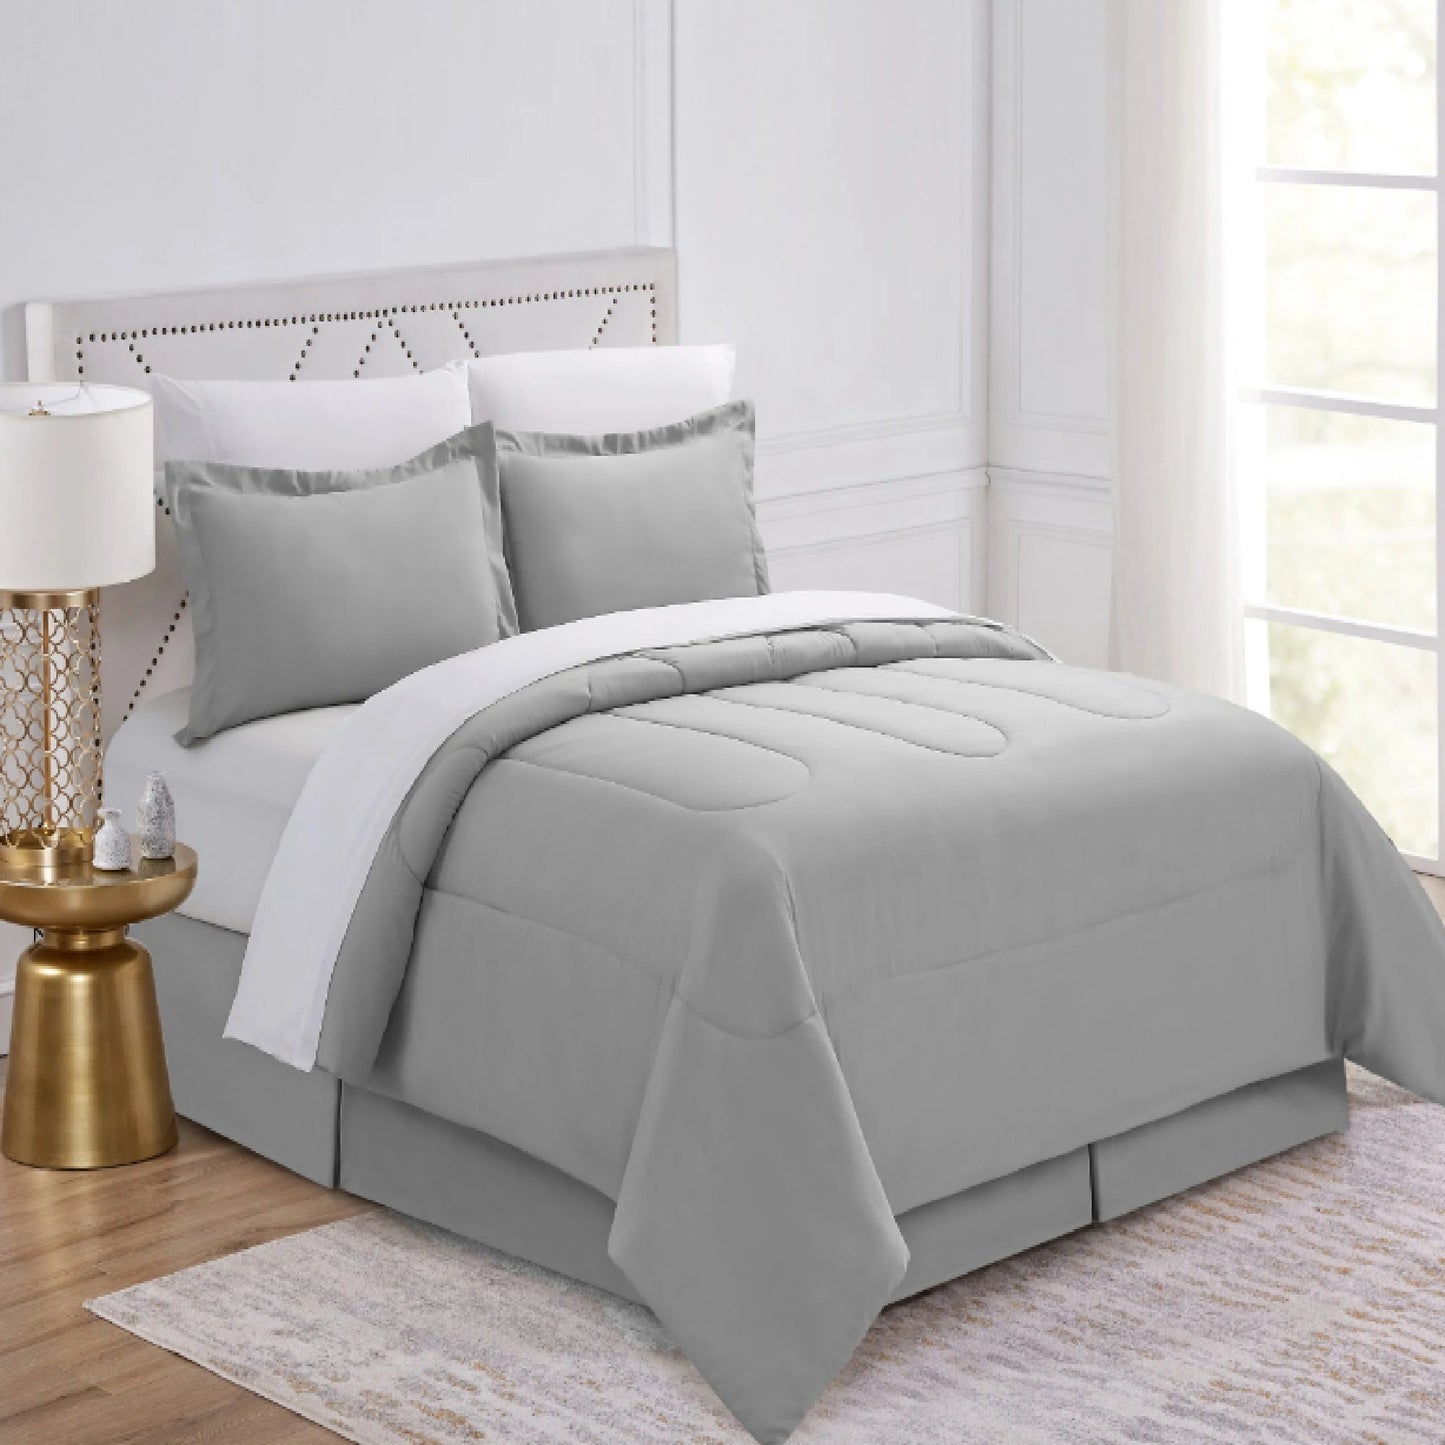 Complete Bedding Experience with Plush Comforter and Elegant Shams - Grey